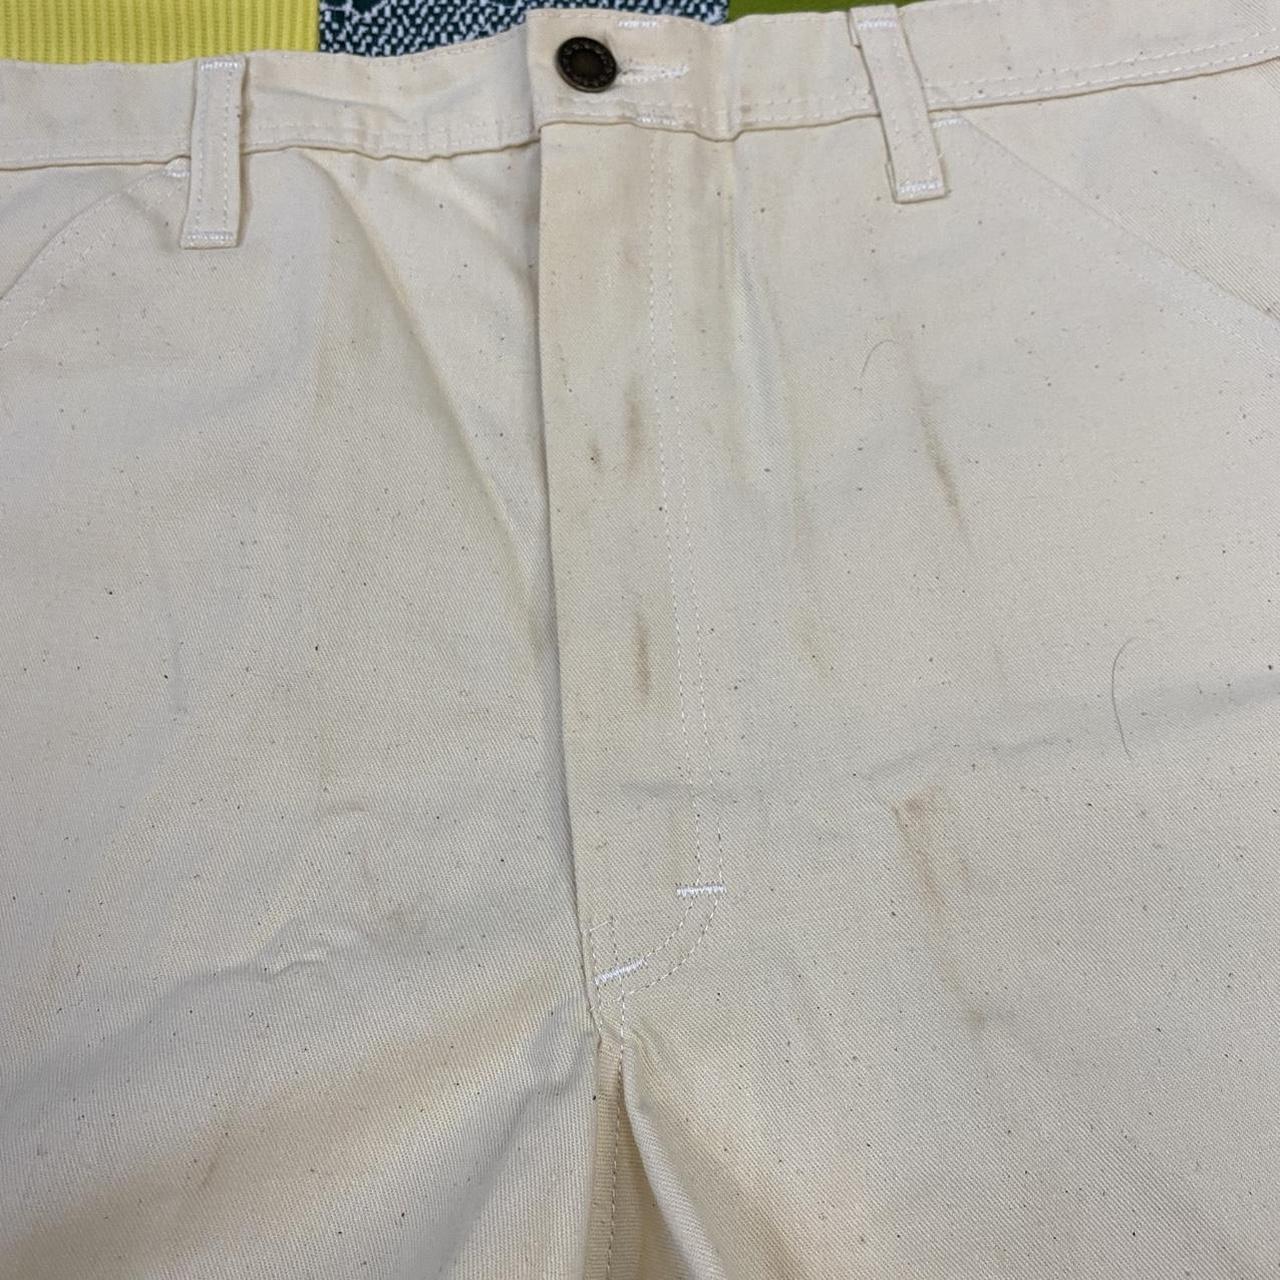 Product Image 4 - Vintage 1980s carpenter shorts by